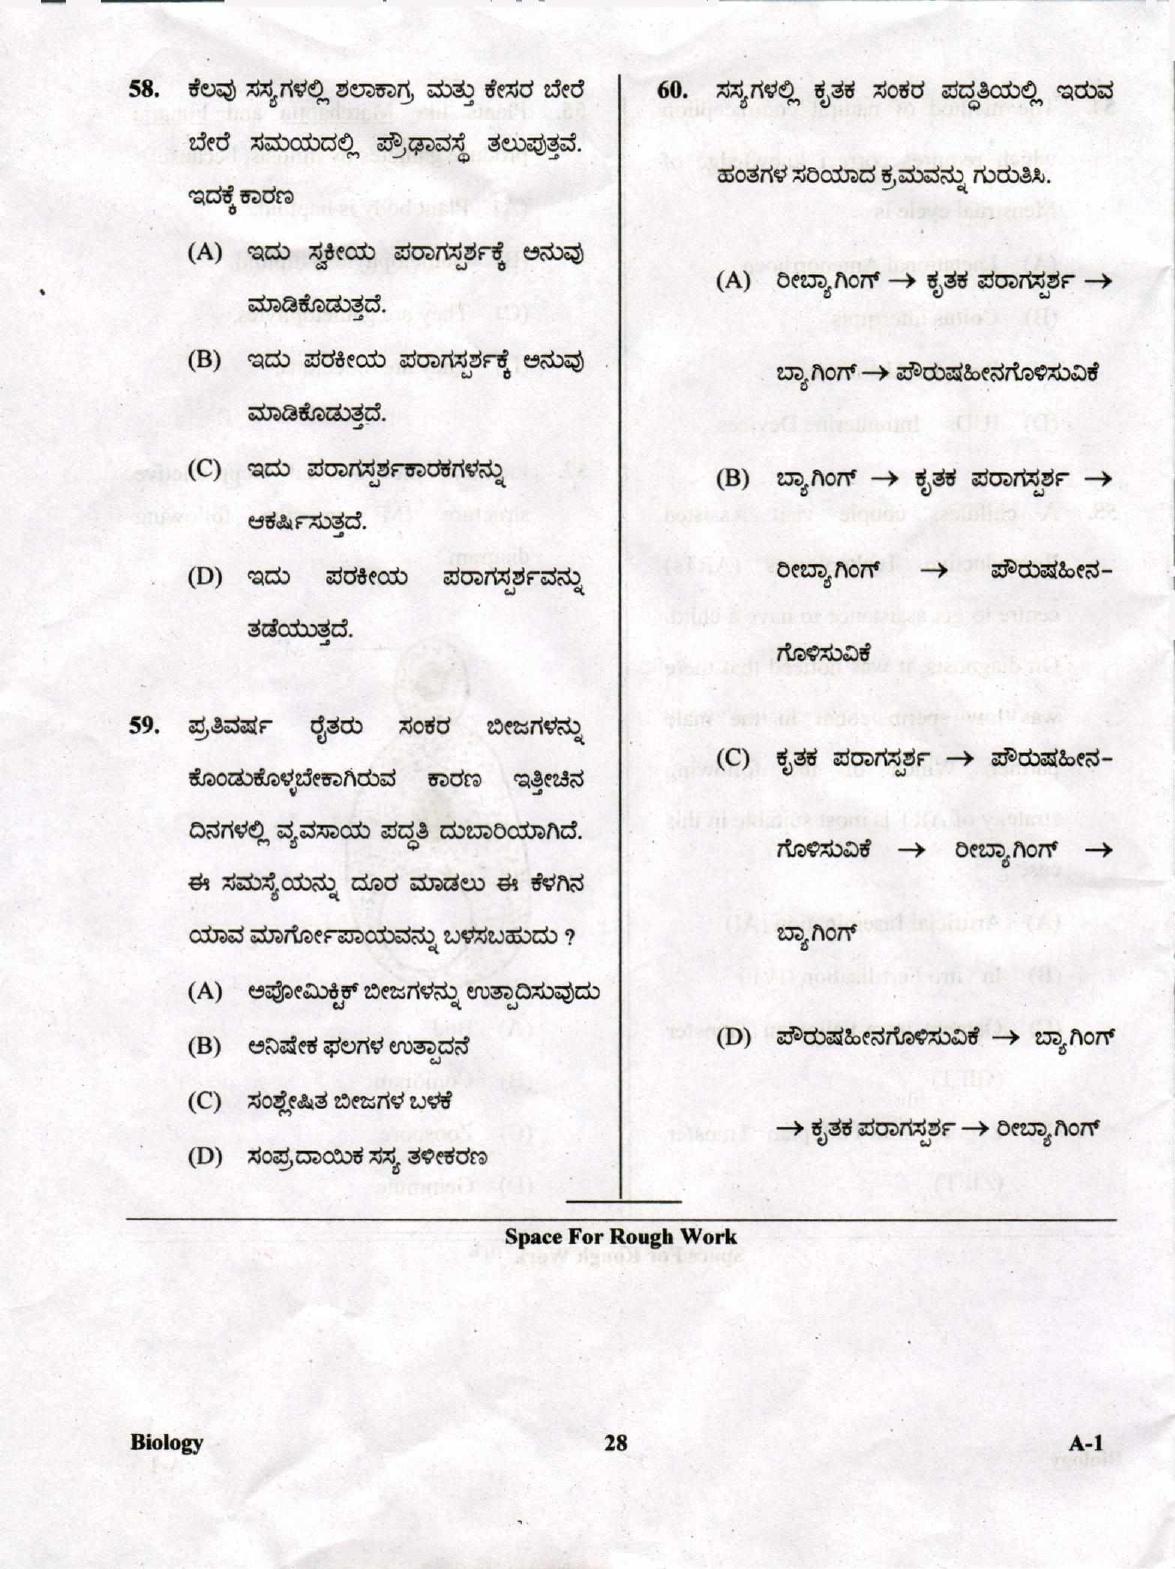 KCET Biology 2019 Question Papers - Page 28